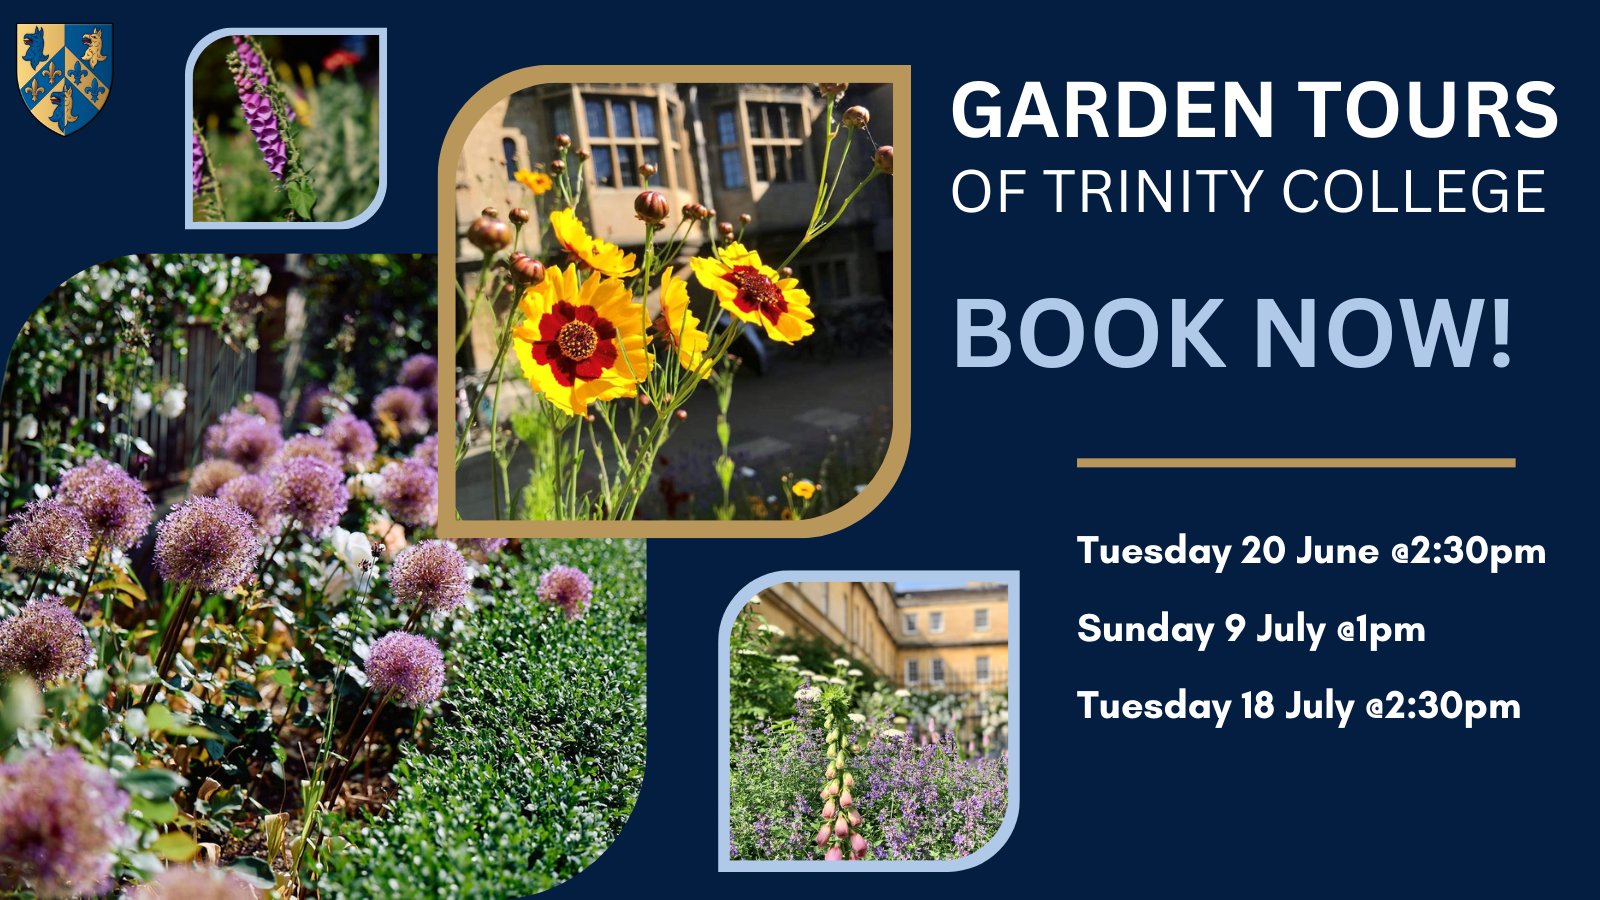 A visual graphic with photos of the Trinity gardens promoting garden tours in college.